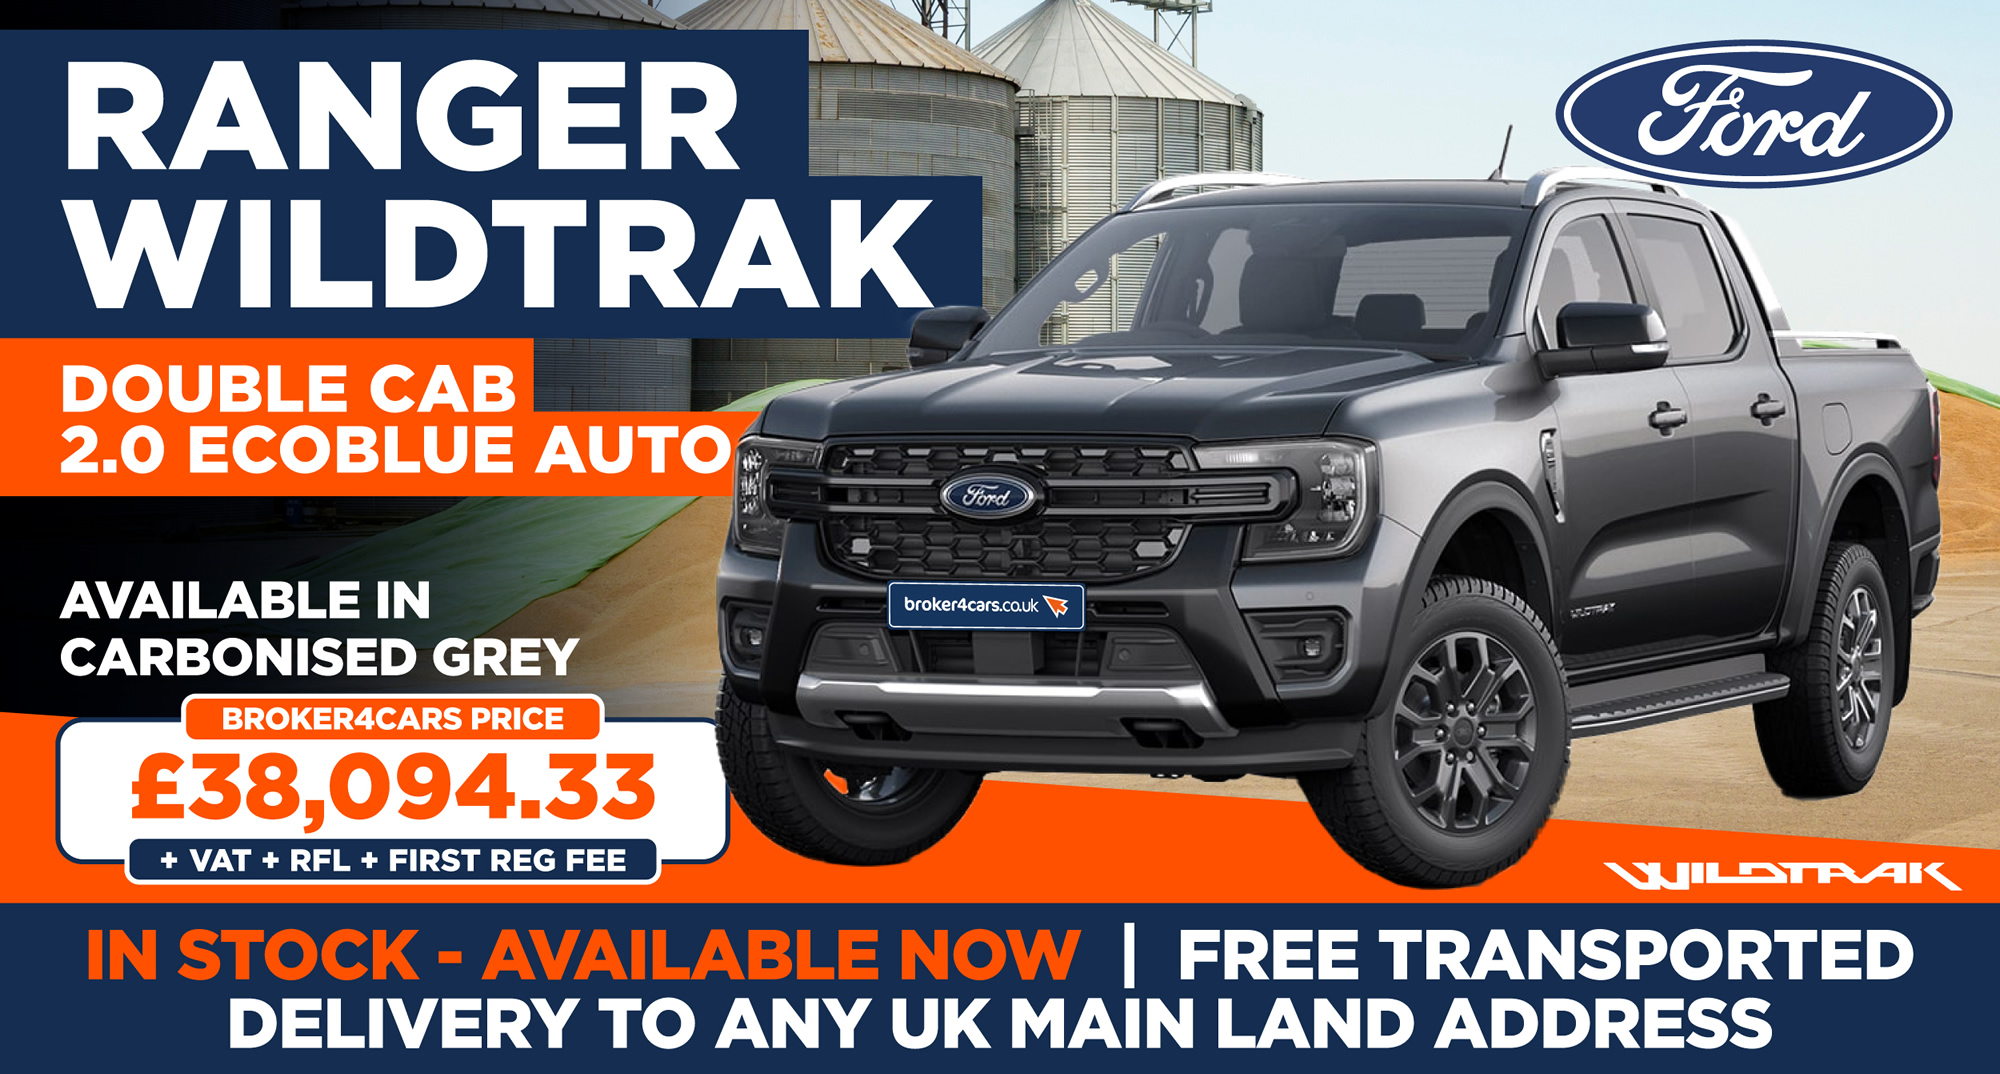 Ranger Wildtrak Double Cab 2.0 Ecoblue Auto. Available in Carbonised Grey